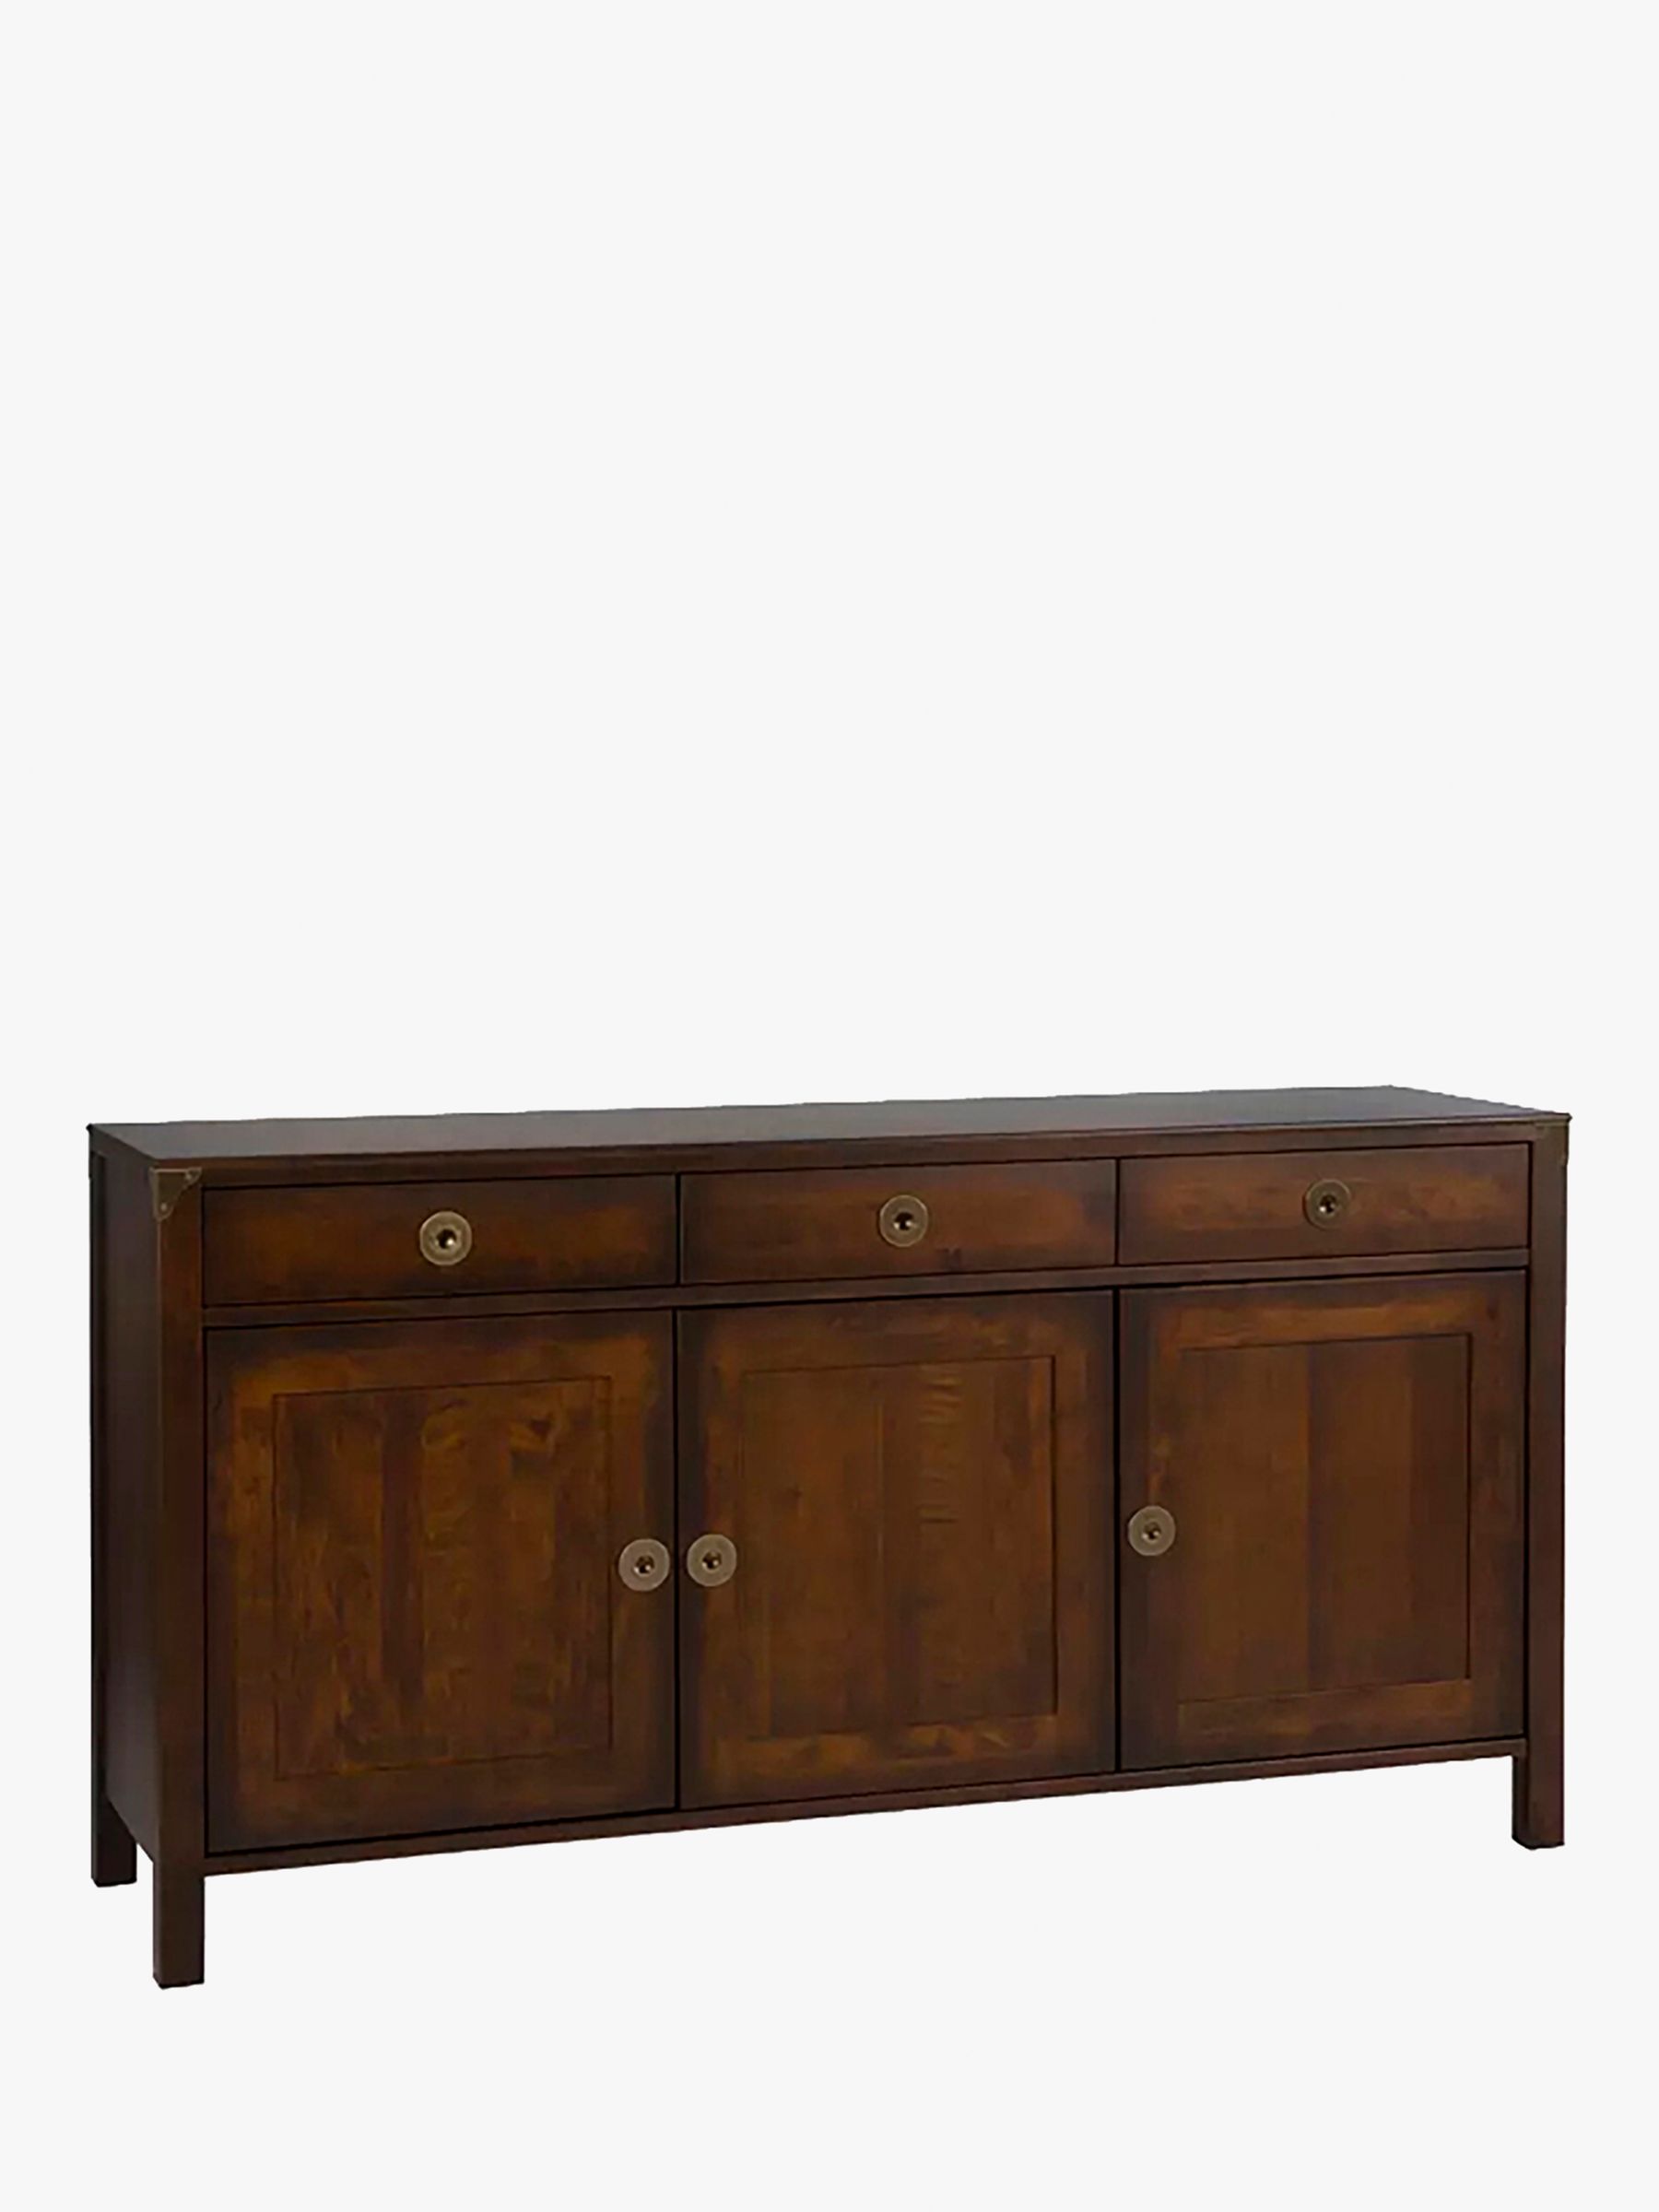 Photo of Laura ashley balmoral large sideboard chestnut brown